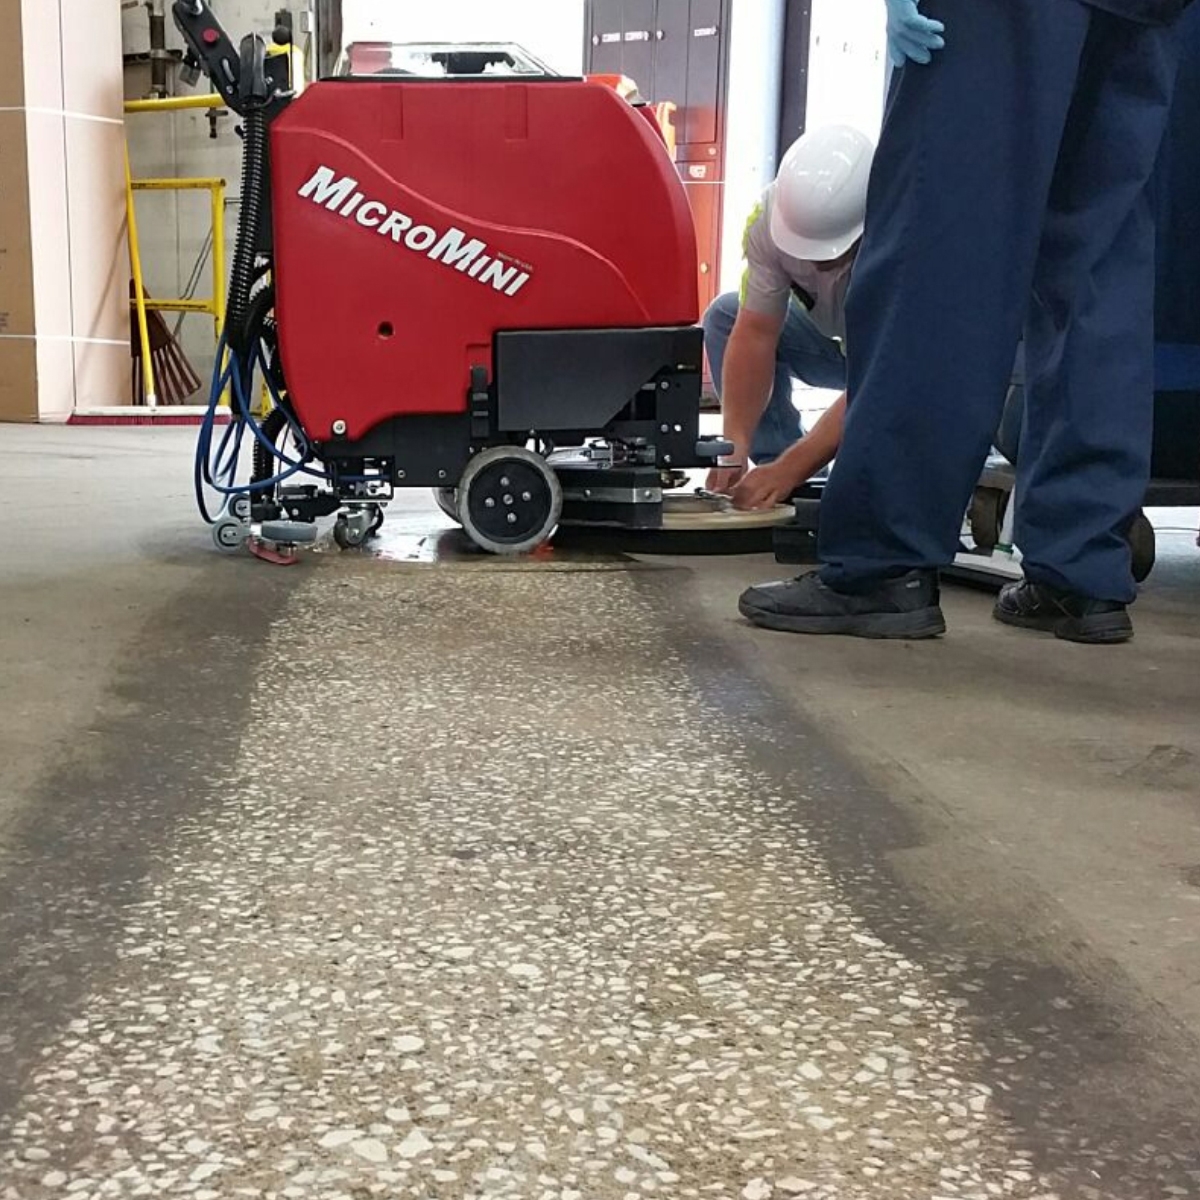 Adjusting the scrub deck for different uses on the MicroMini Scrubber